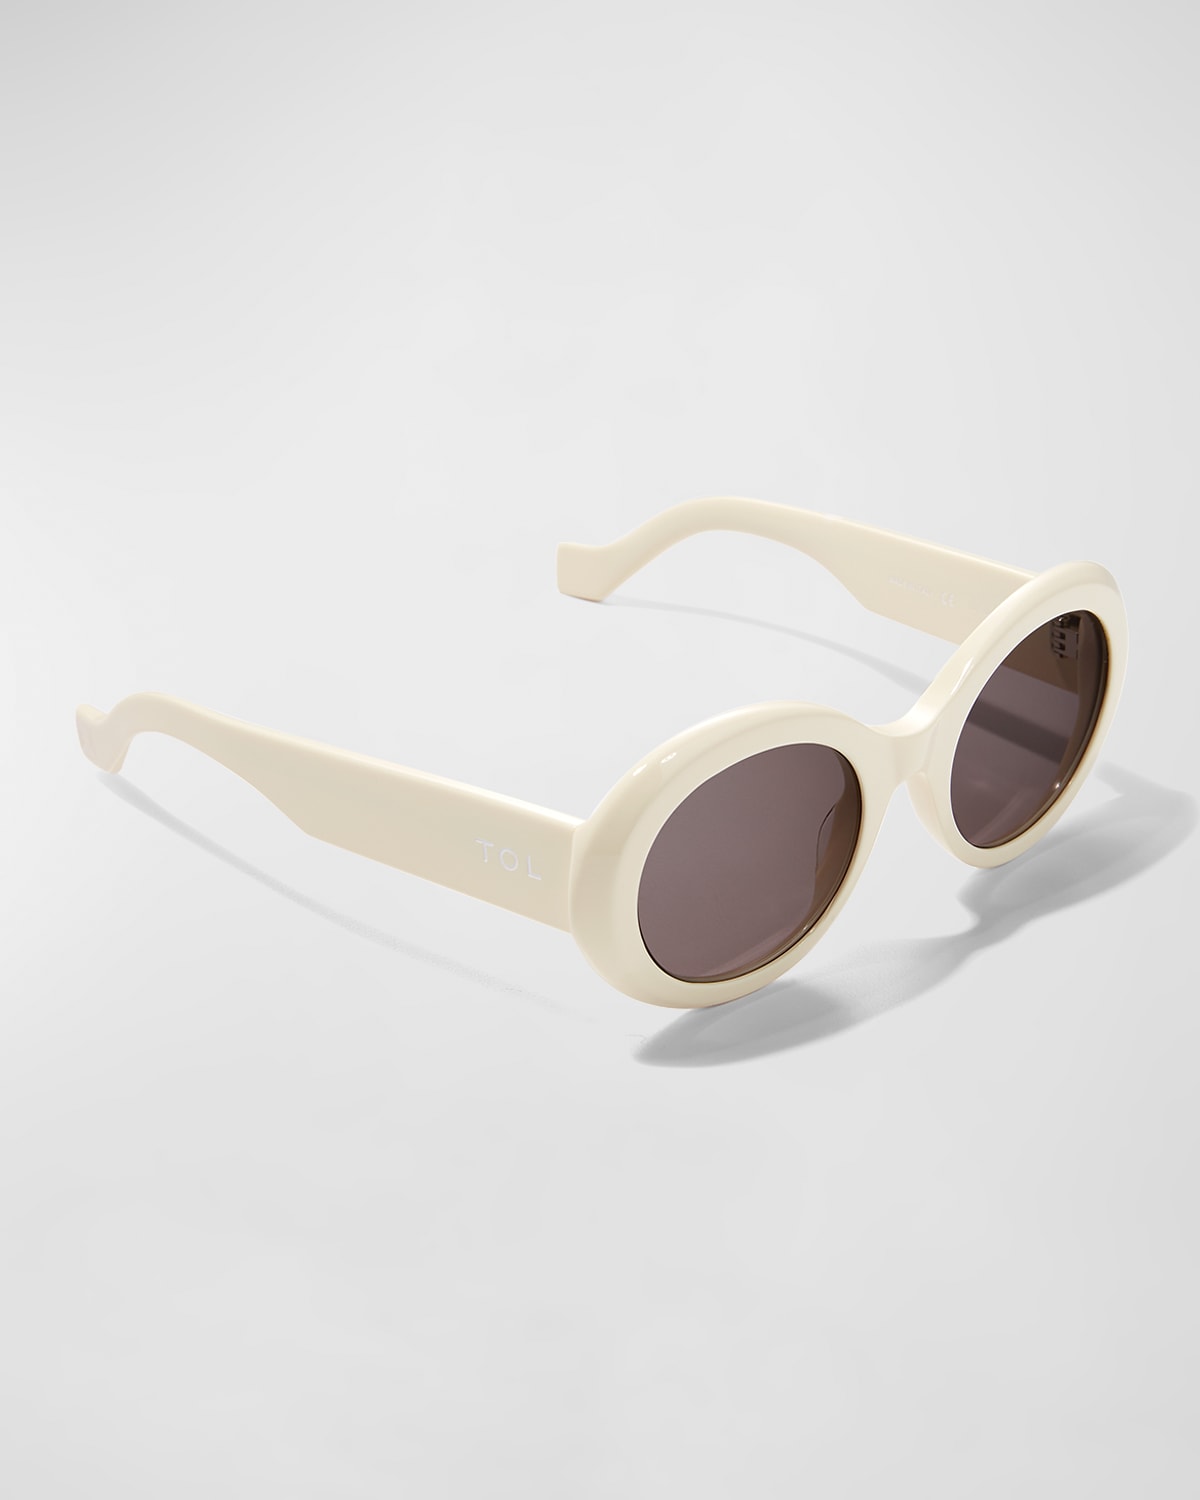 Tol Eyewear Double Round Acetate Sunglasses In Blossom